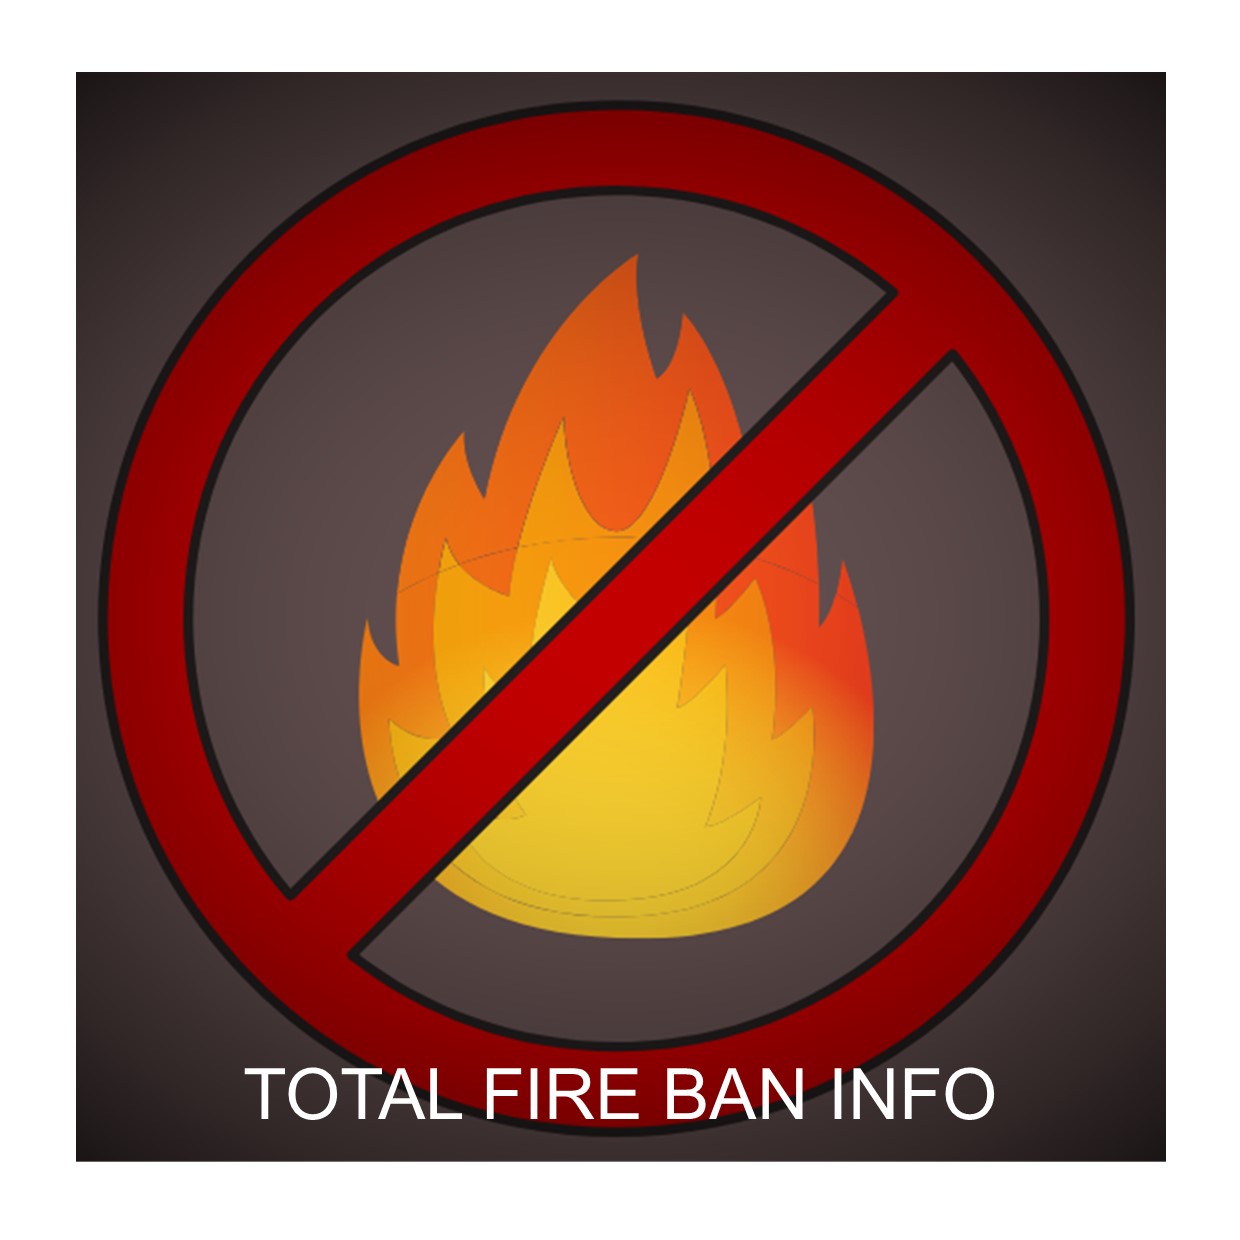 Total fire ban information